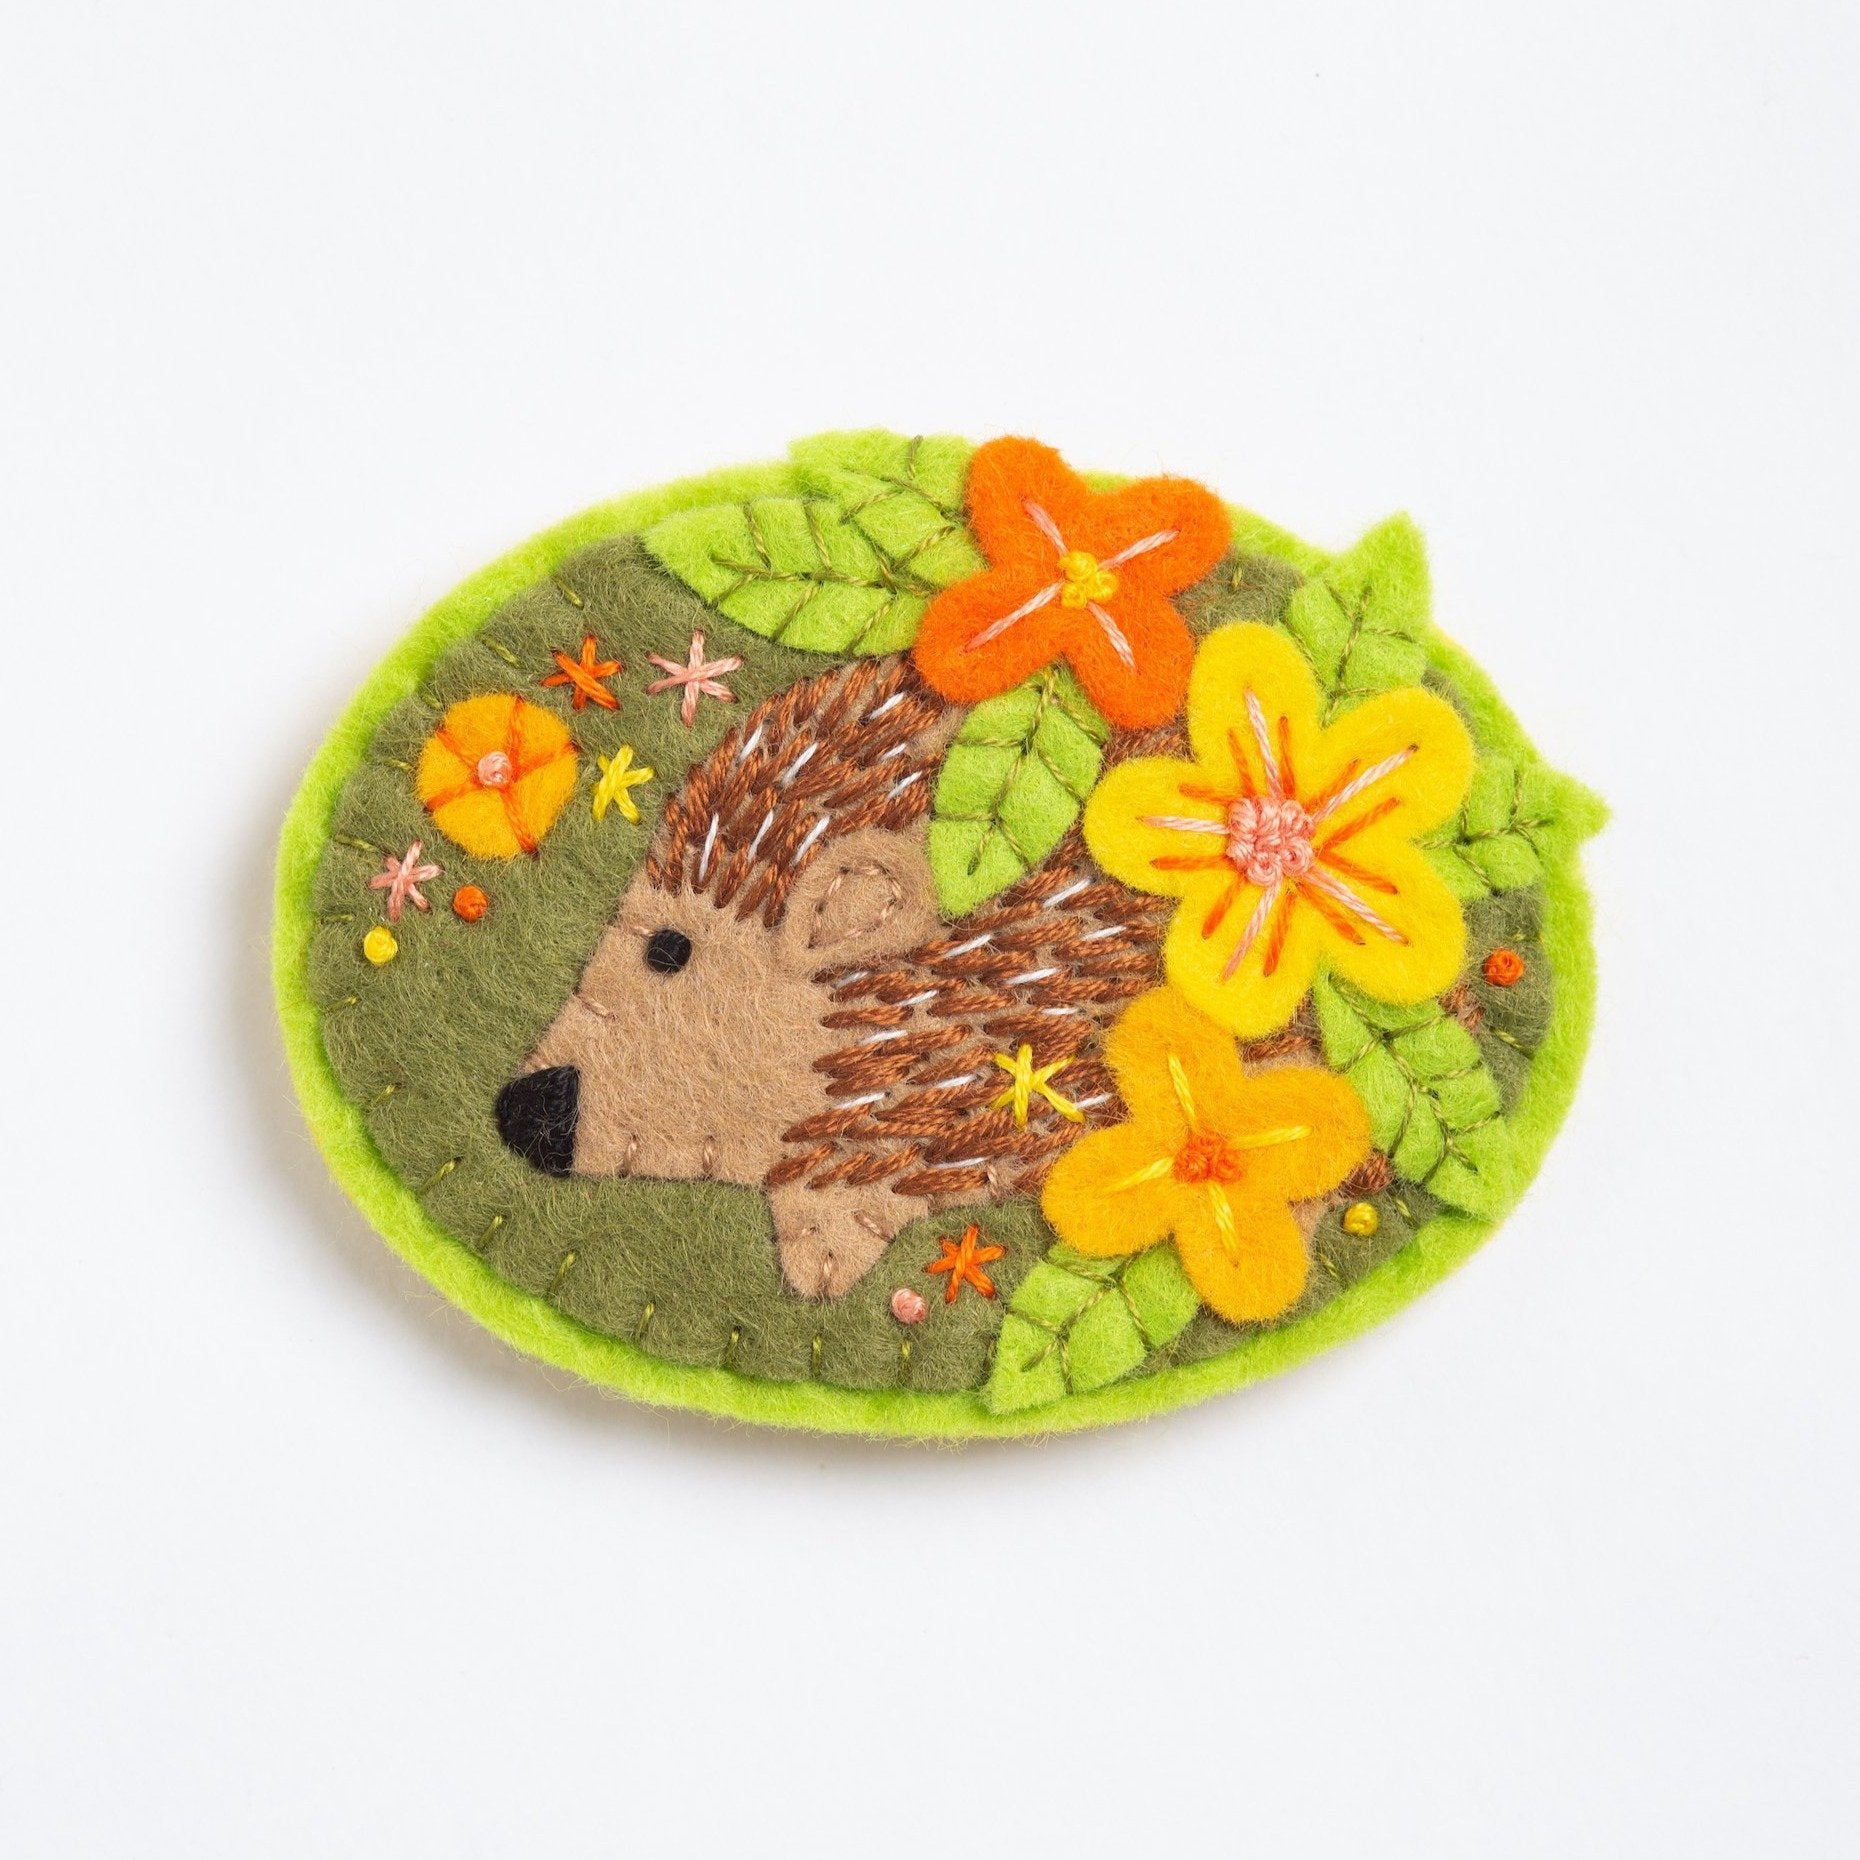 clipped image of hedgehog brooch on white background.